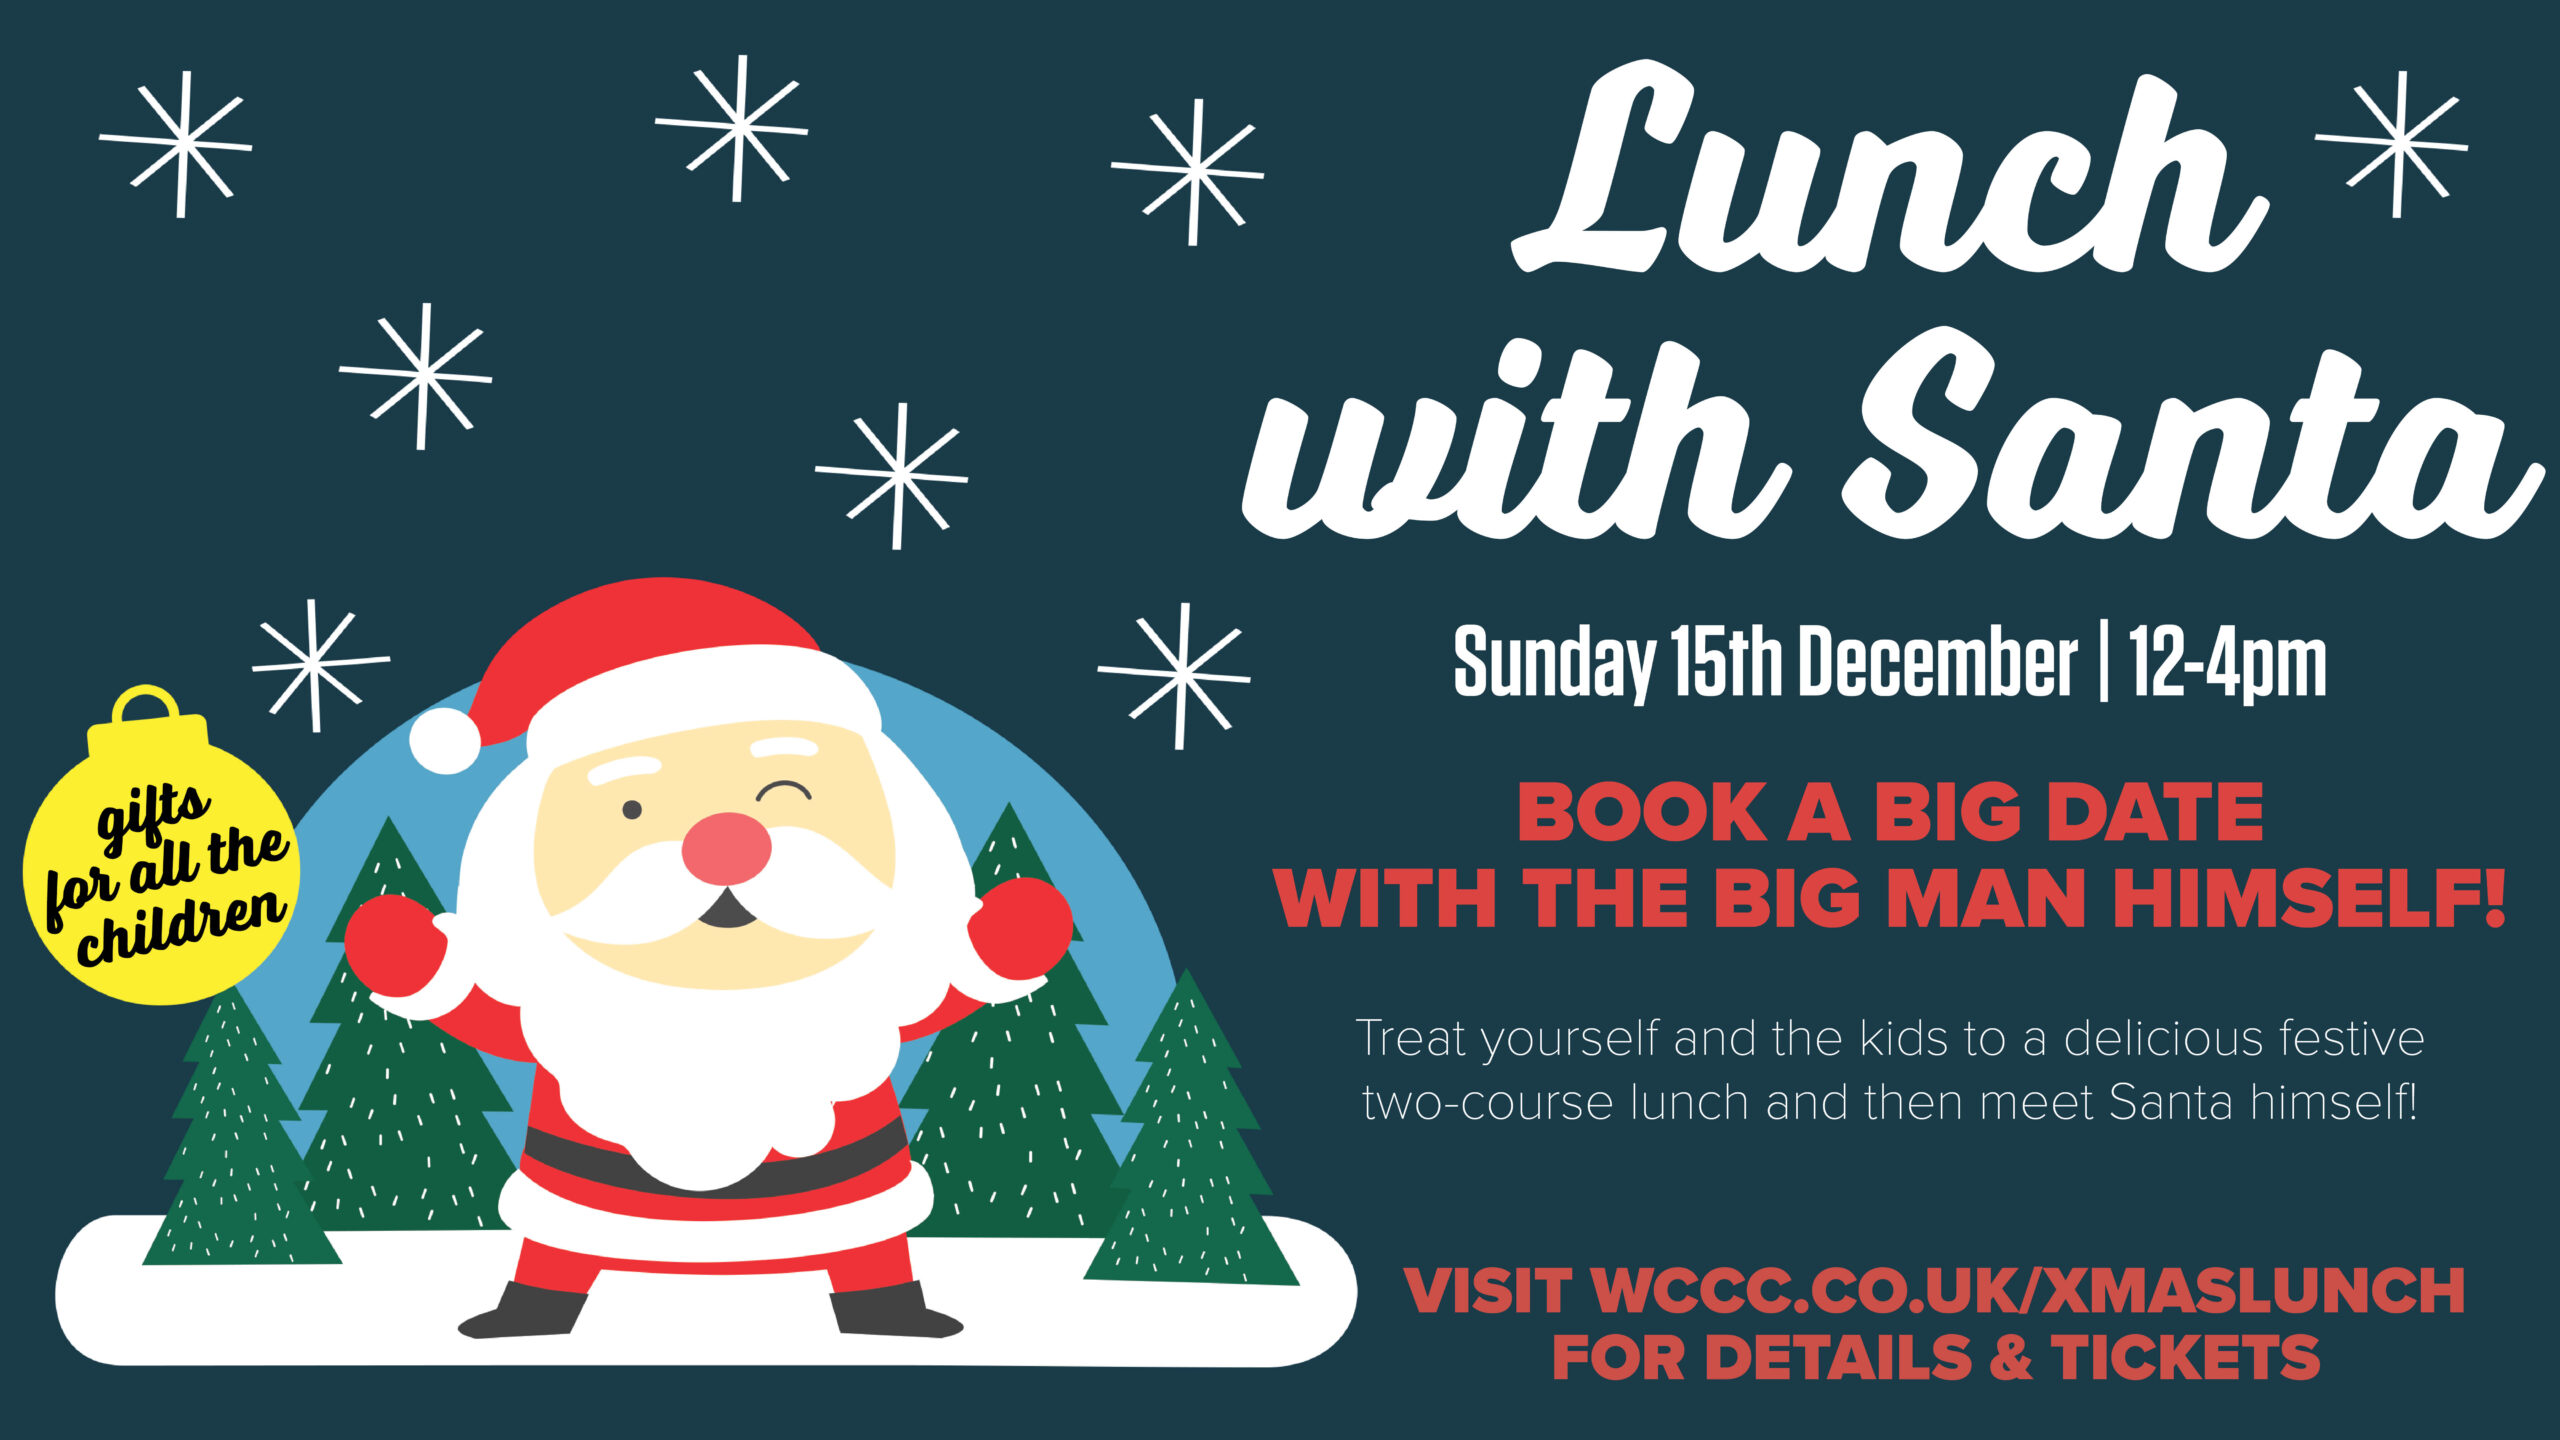 LUNCH WITH SANTA SUNDAY 15 DECEMBER Worcestershire CCC